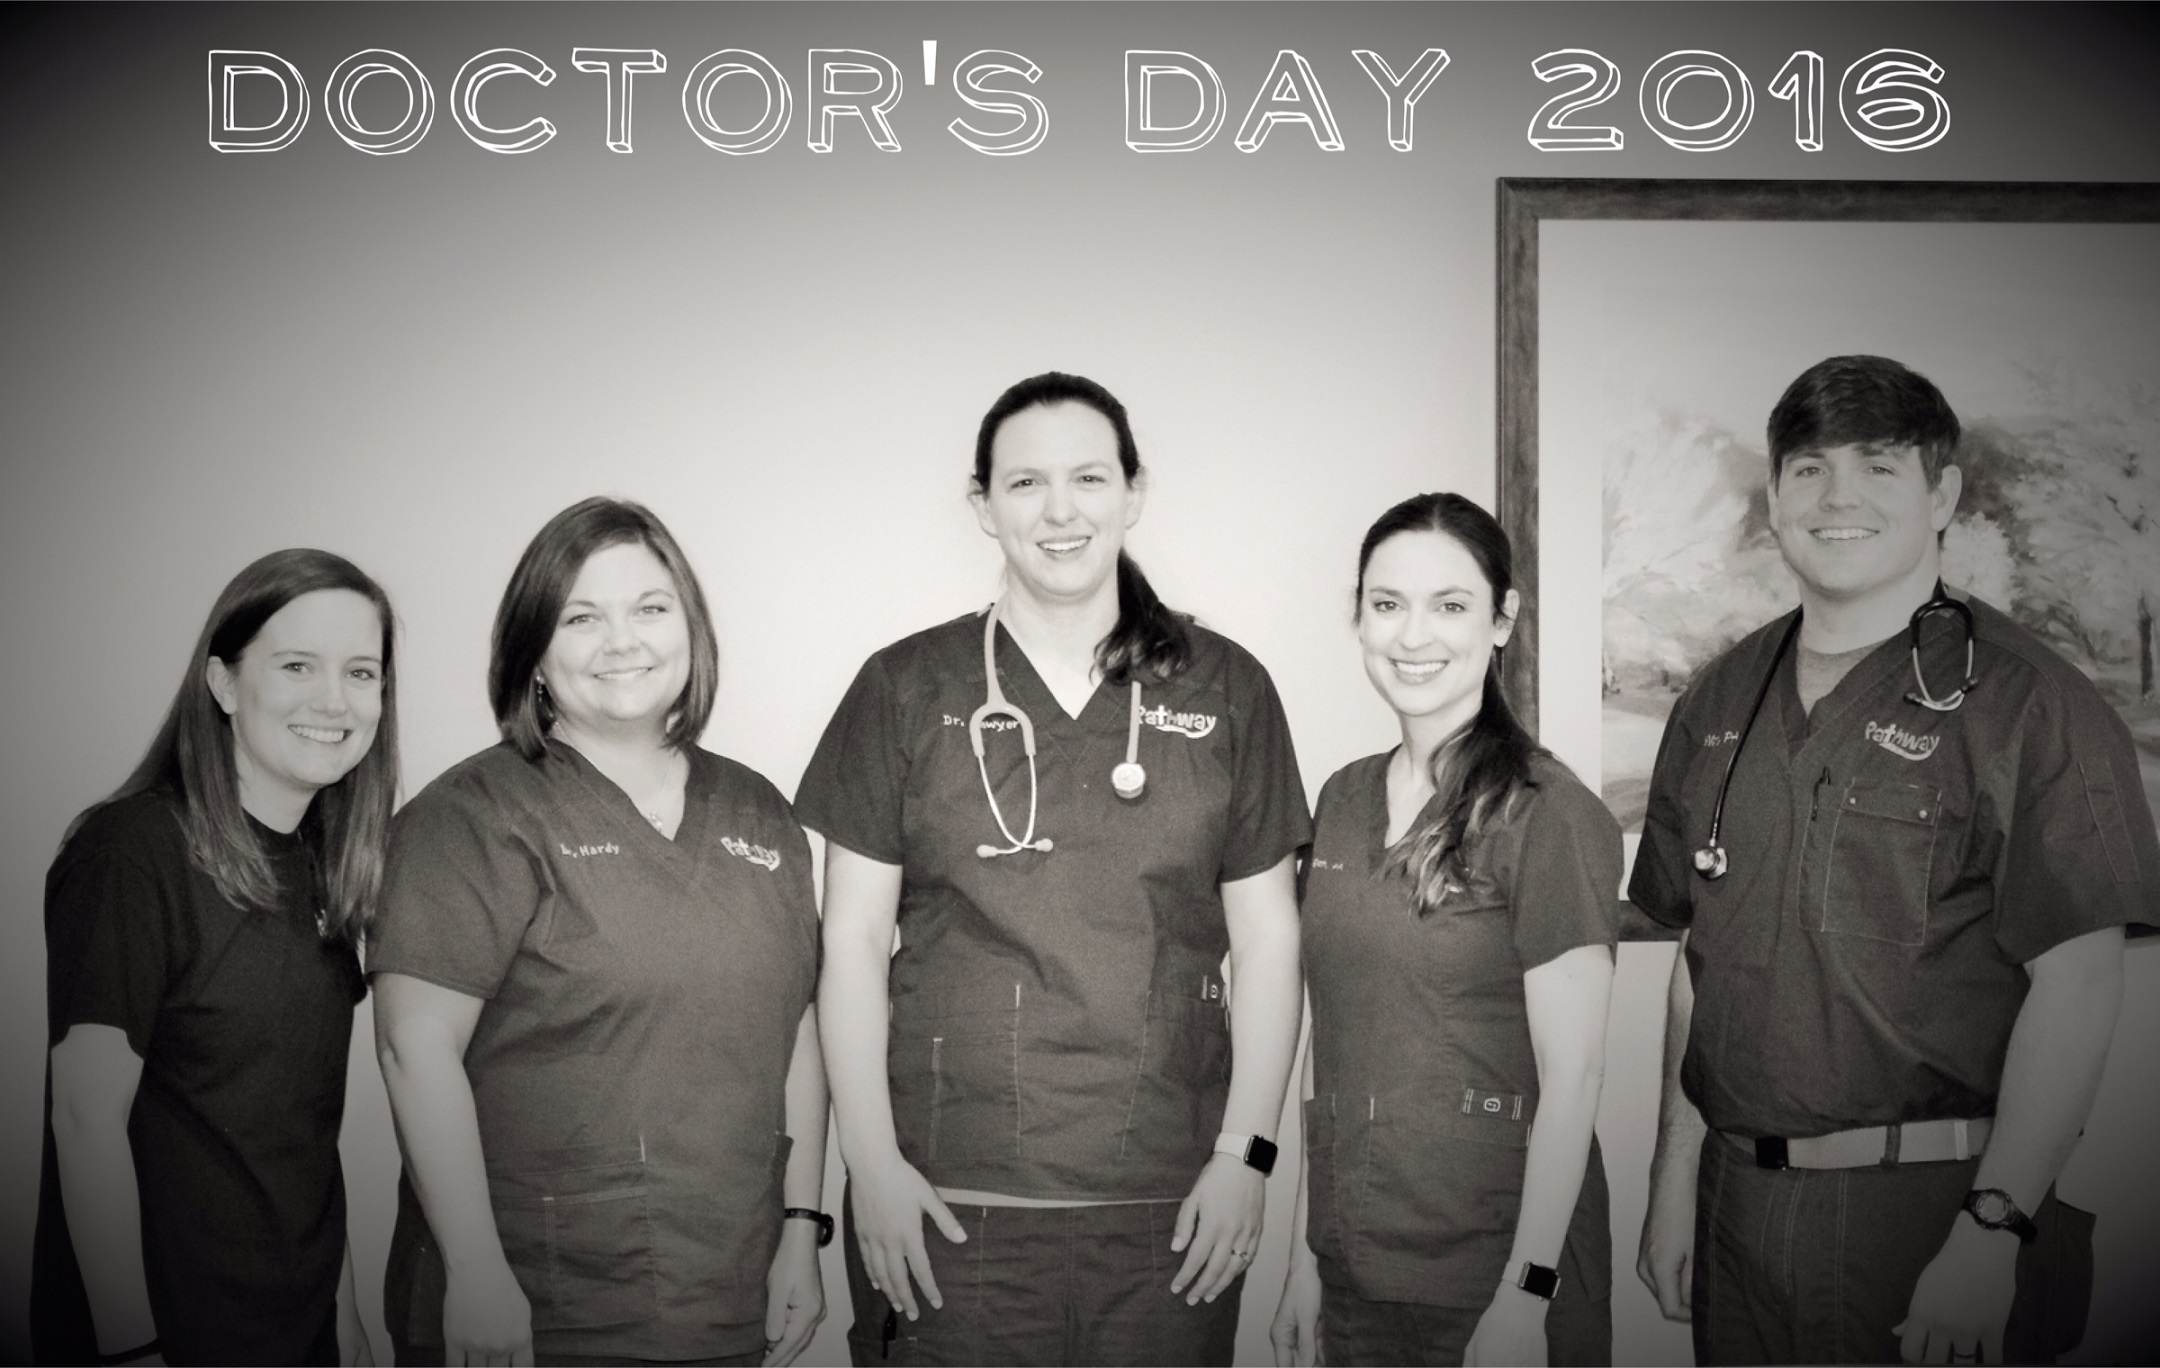 Happy Doctor’s Day to our wonderful providers!